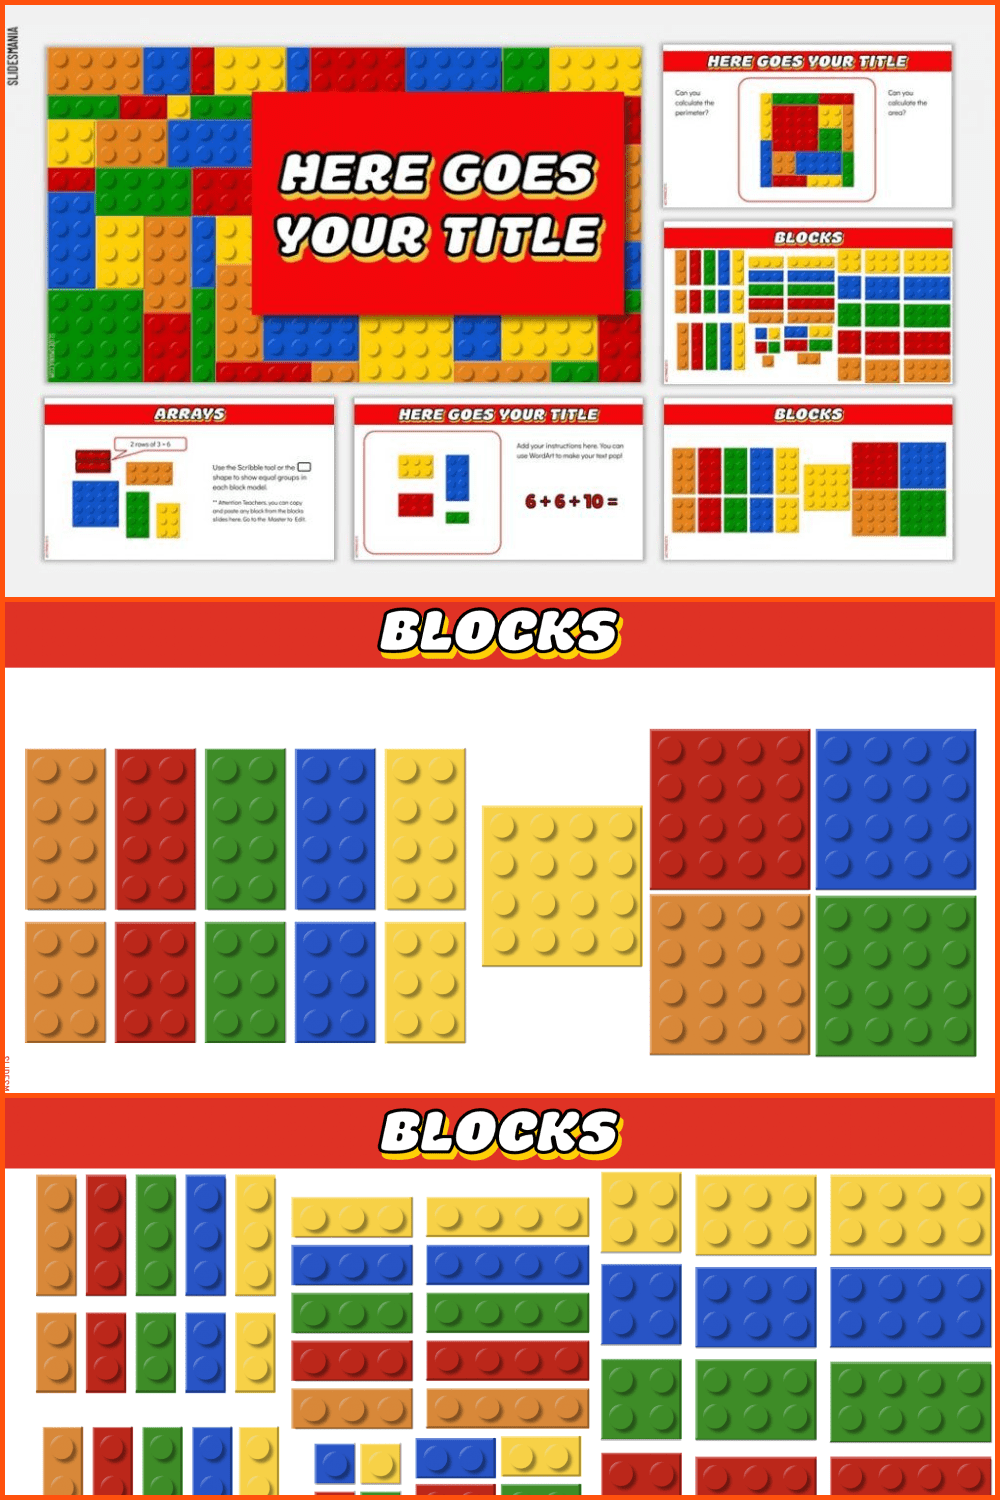 LegoMania a Google Slides Template for Math Lessons Inspired by Lego Blocks. Fun Google Slides Theme.